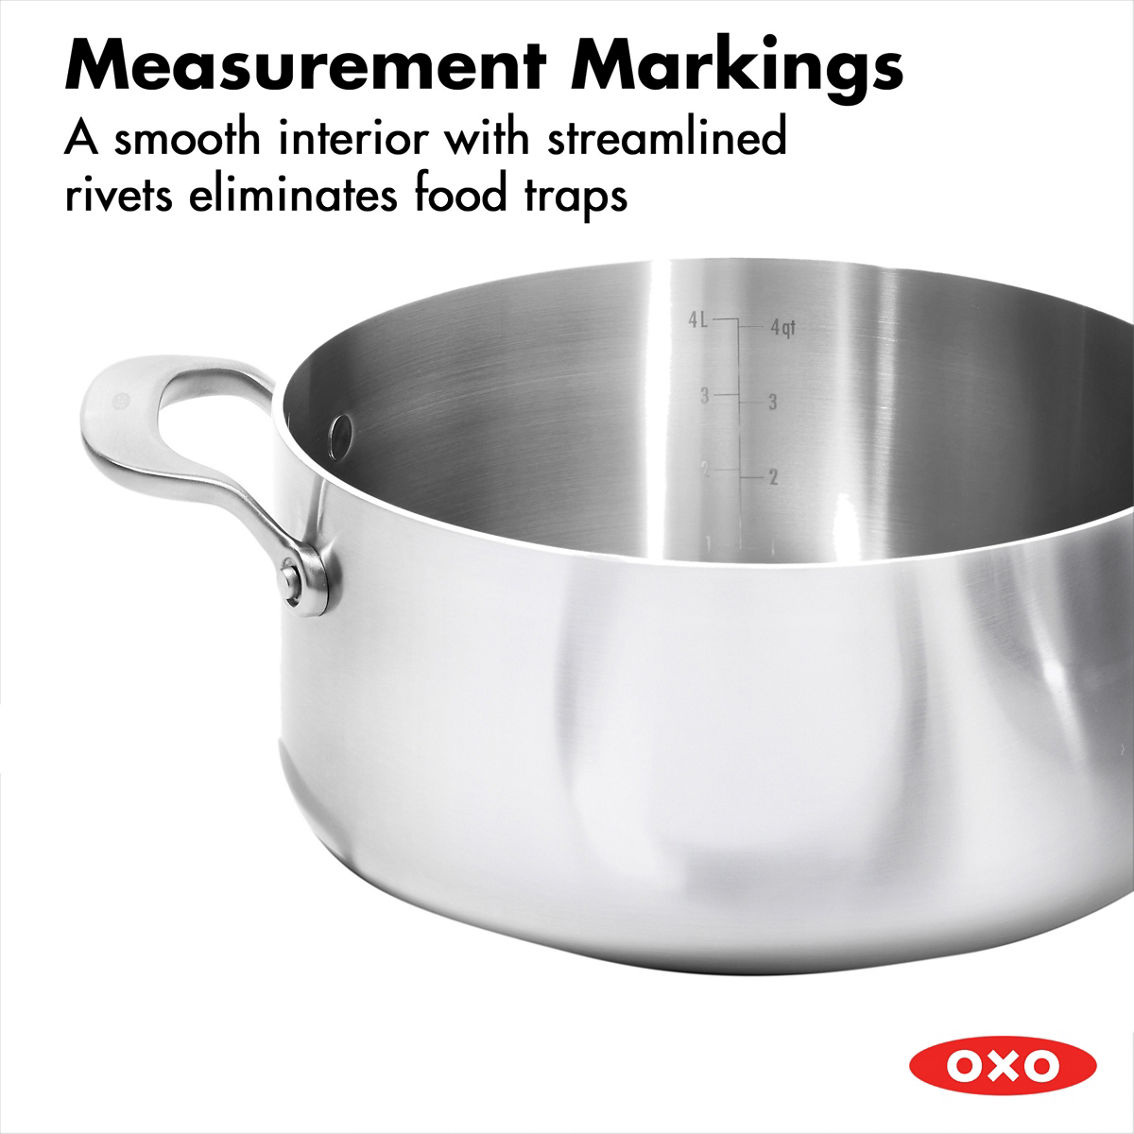 OXO Mira 3-Ply Stainless Steel Cookware Pots and Pans 10 pc. Set - Image 4 of 8